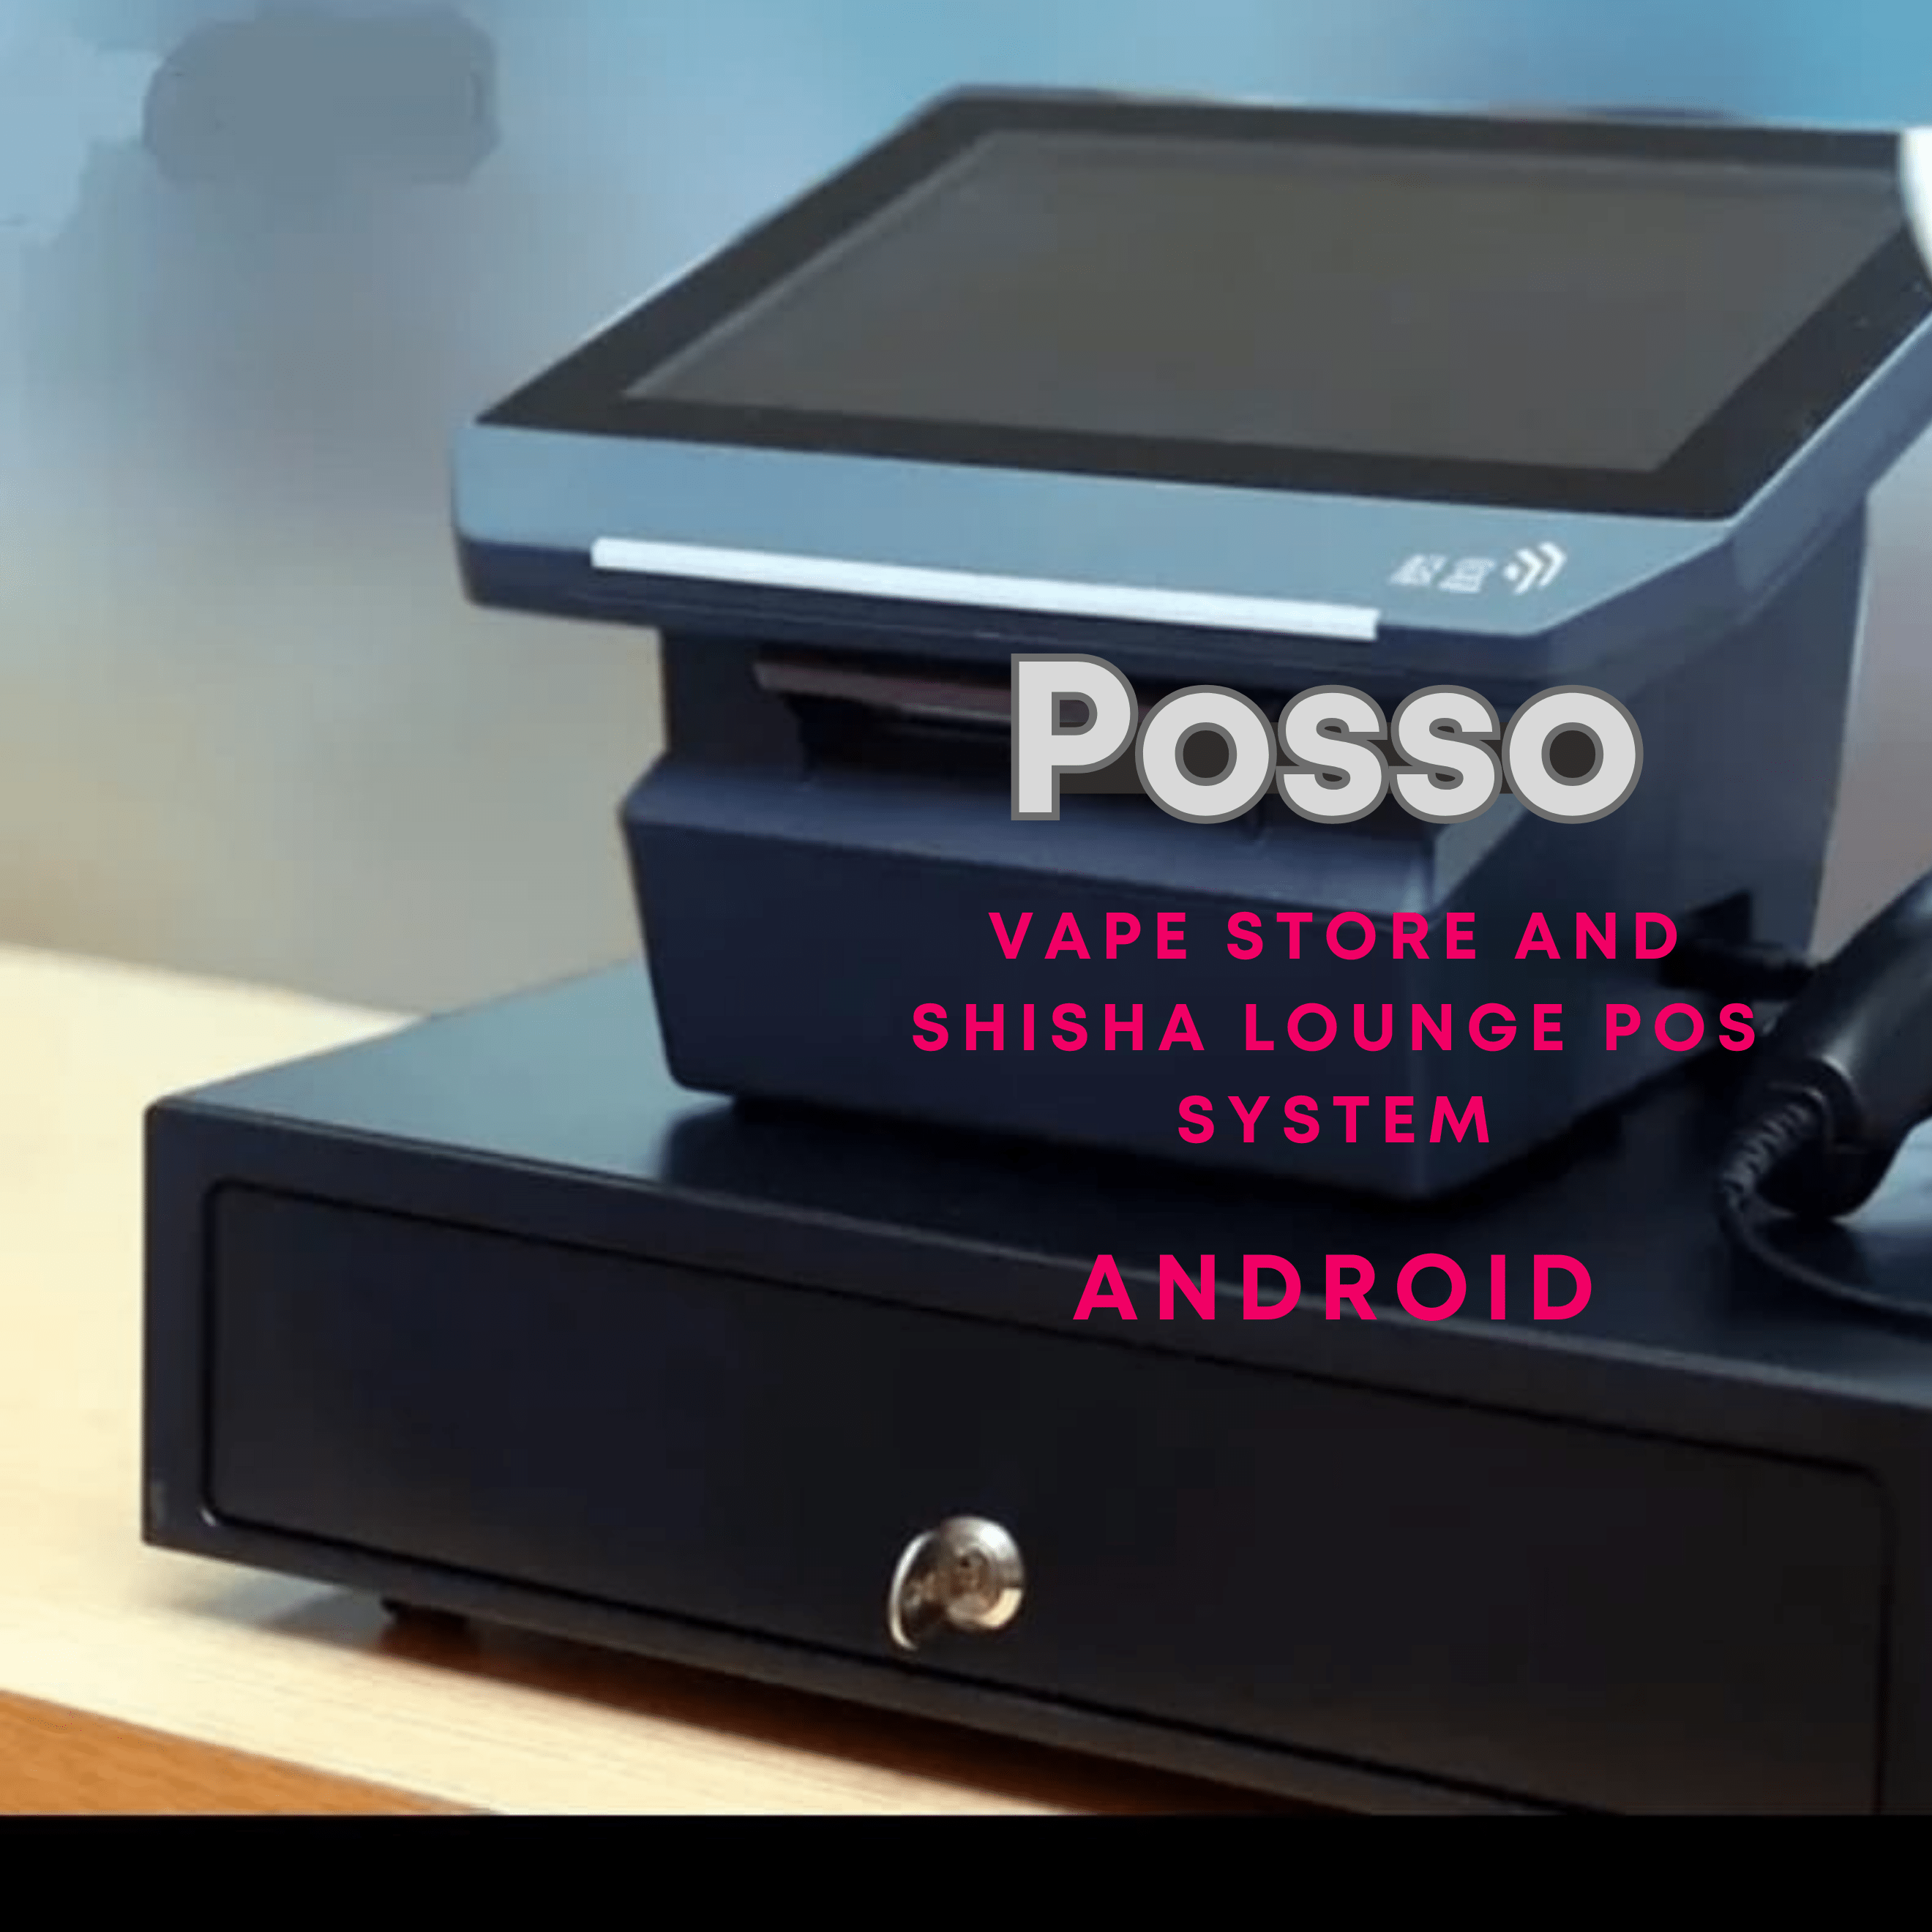 Android epos systems